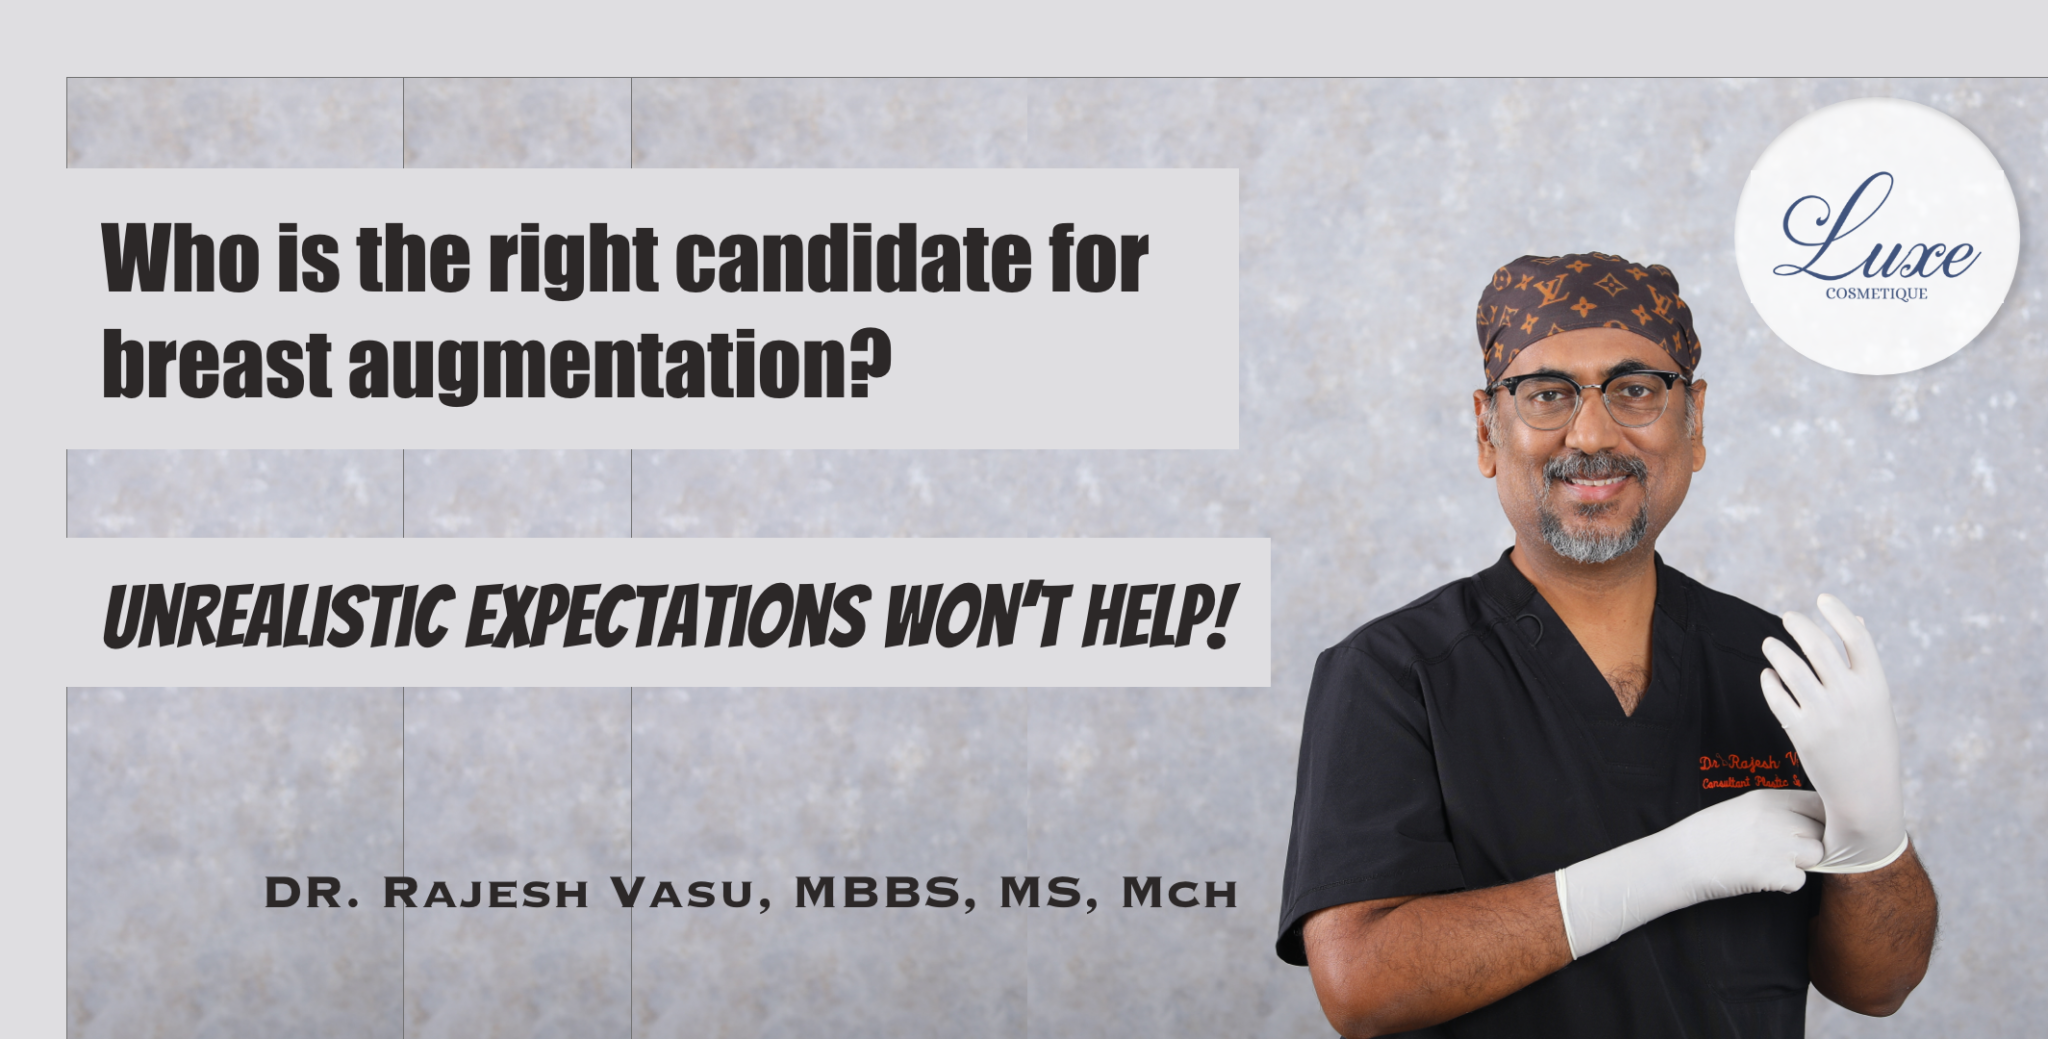 Who is the right candidate for breast augmentation? Unrealistic expectations won't help!